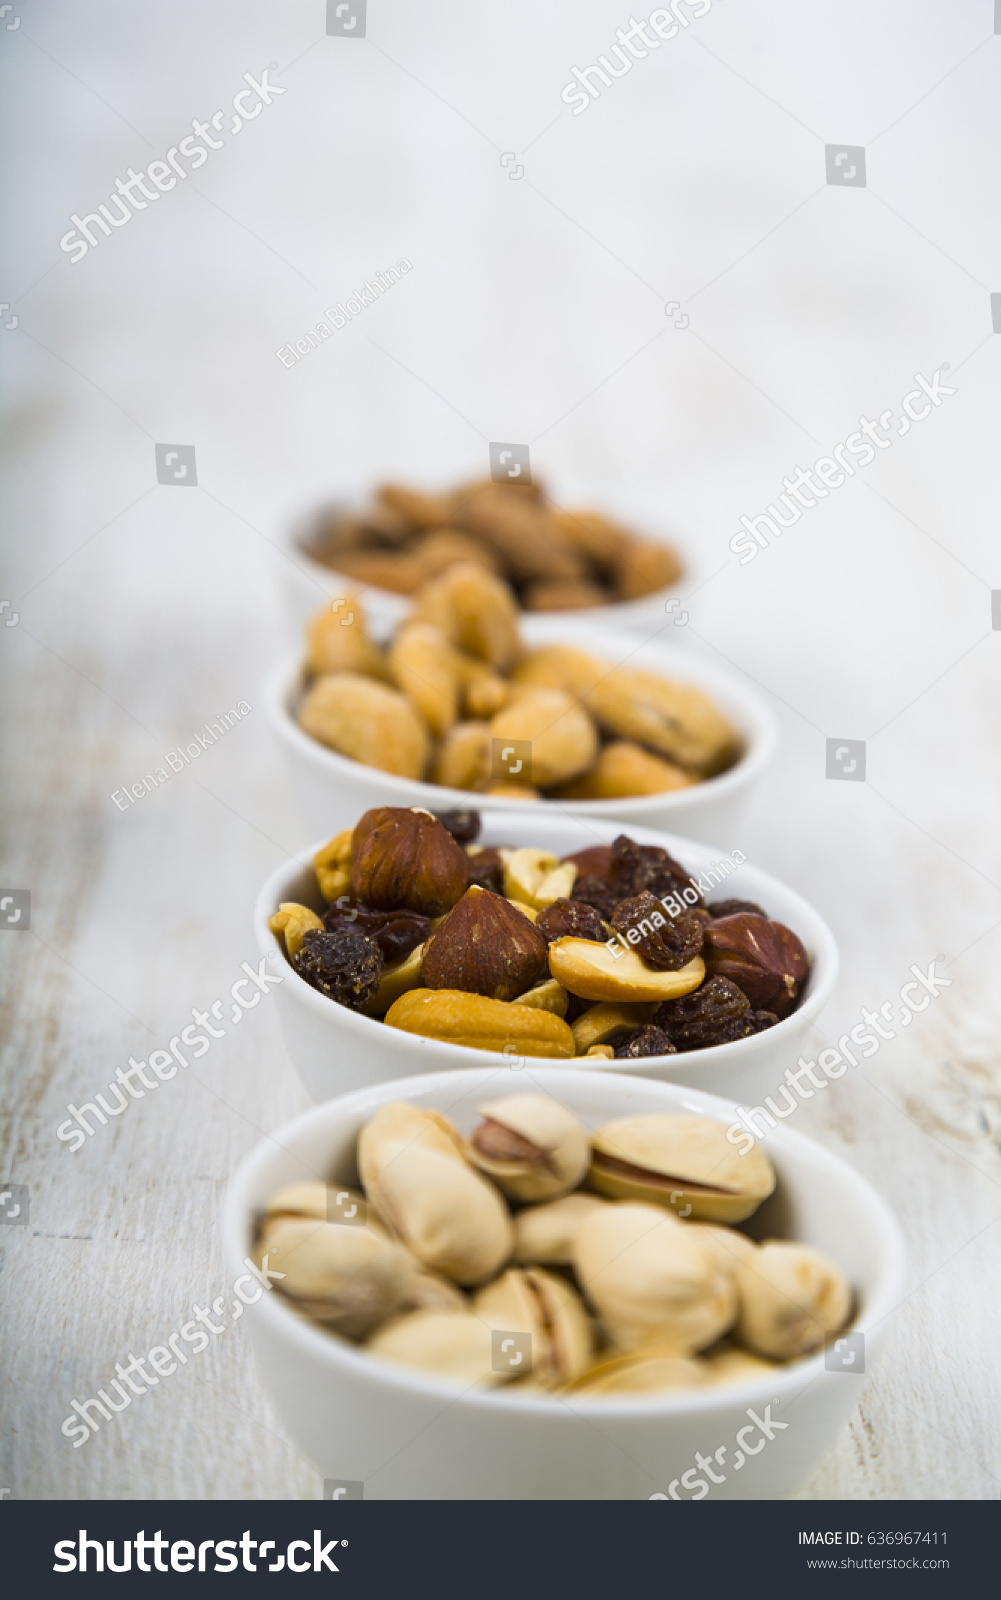 Nuts in a plate on a  wooden table. Different kinds of tasty and healthy nuts. #636967411